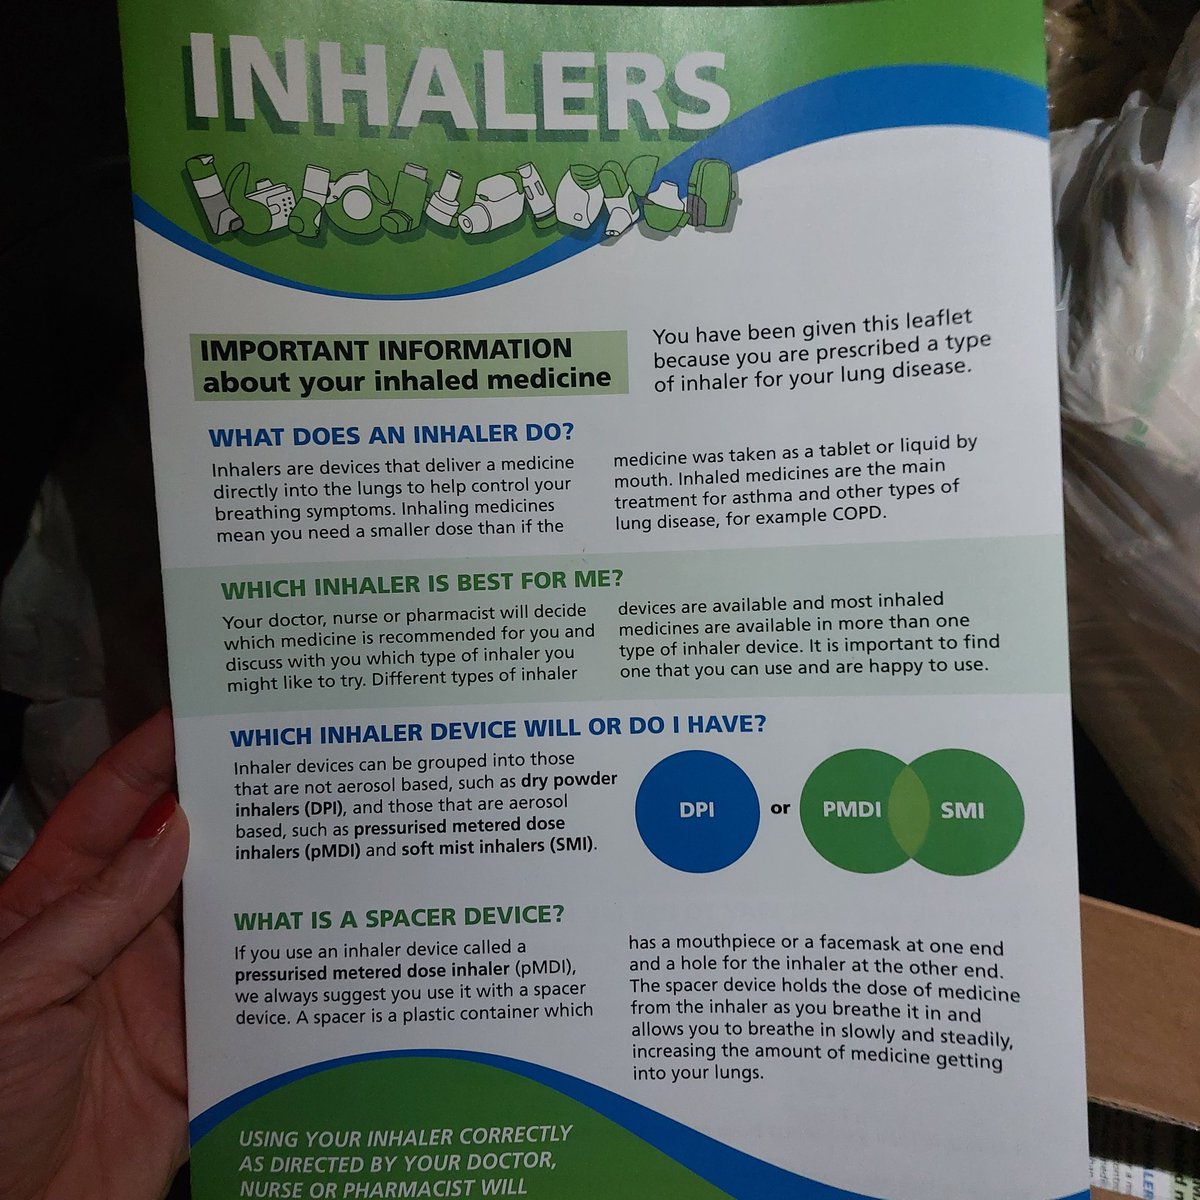 Looking forward to handing out these Inhaler Techniqe Toolkits to my Primary Care colleagues tomorrow! Green prescribing is definitely still on the agenda! 👍🫁#breathegreenLLR #respIsBest Massive thank you to @murph_ac for setting up this fantastic initiative 👏